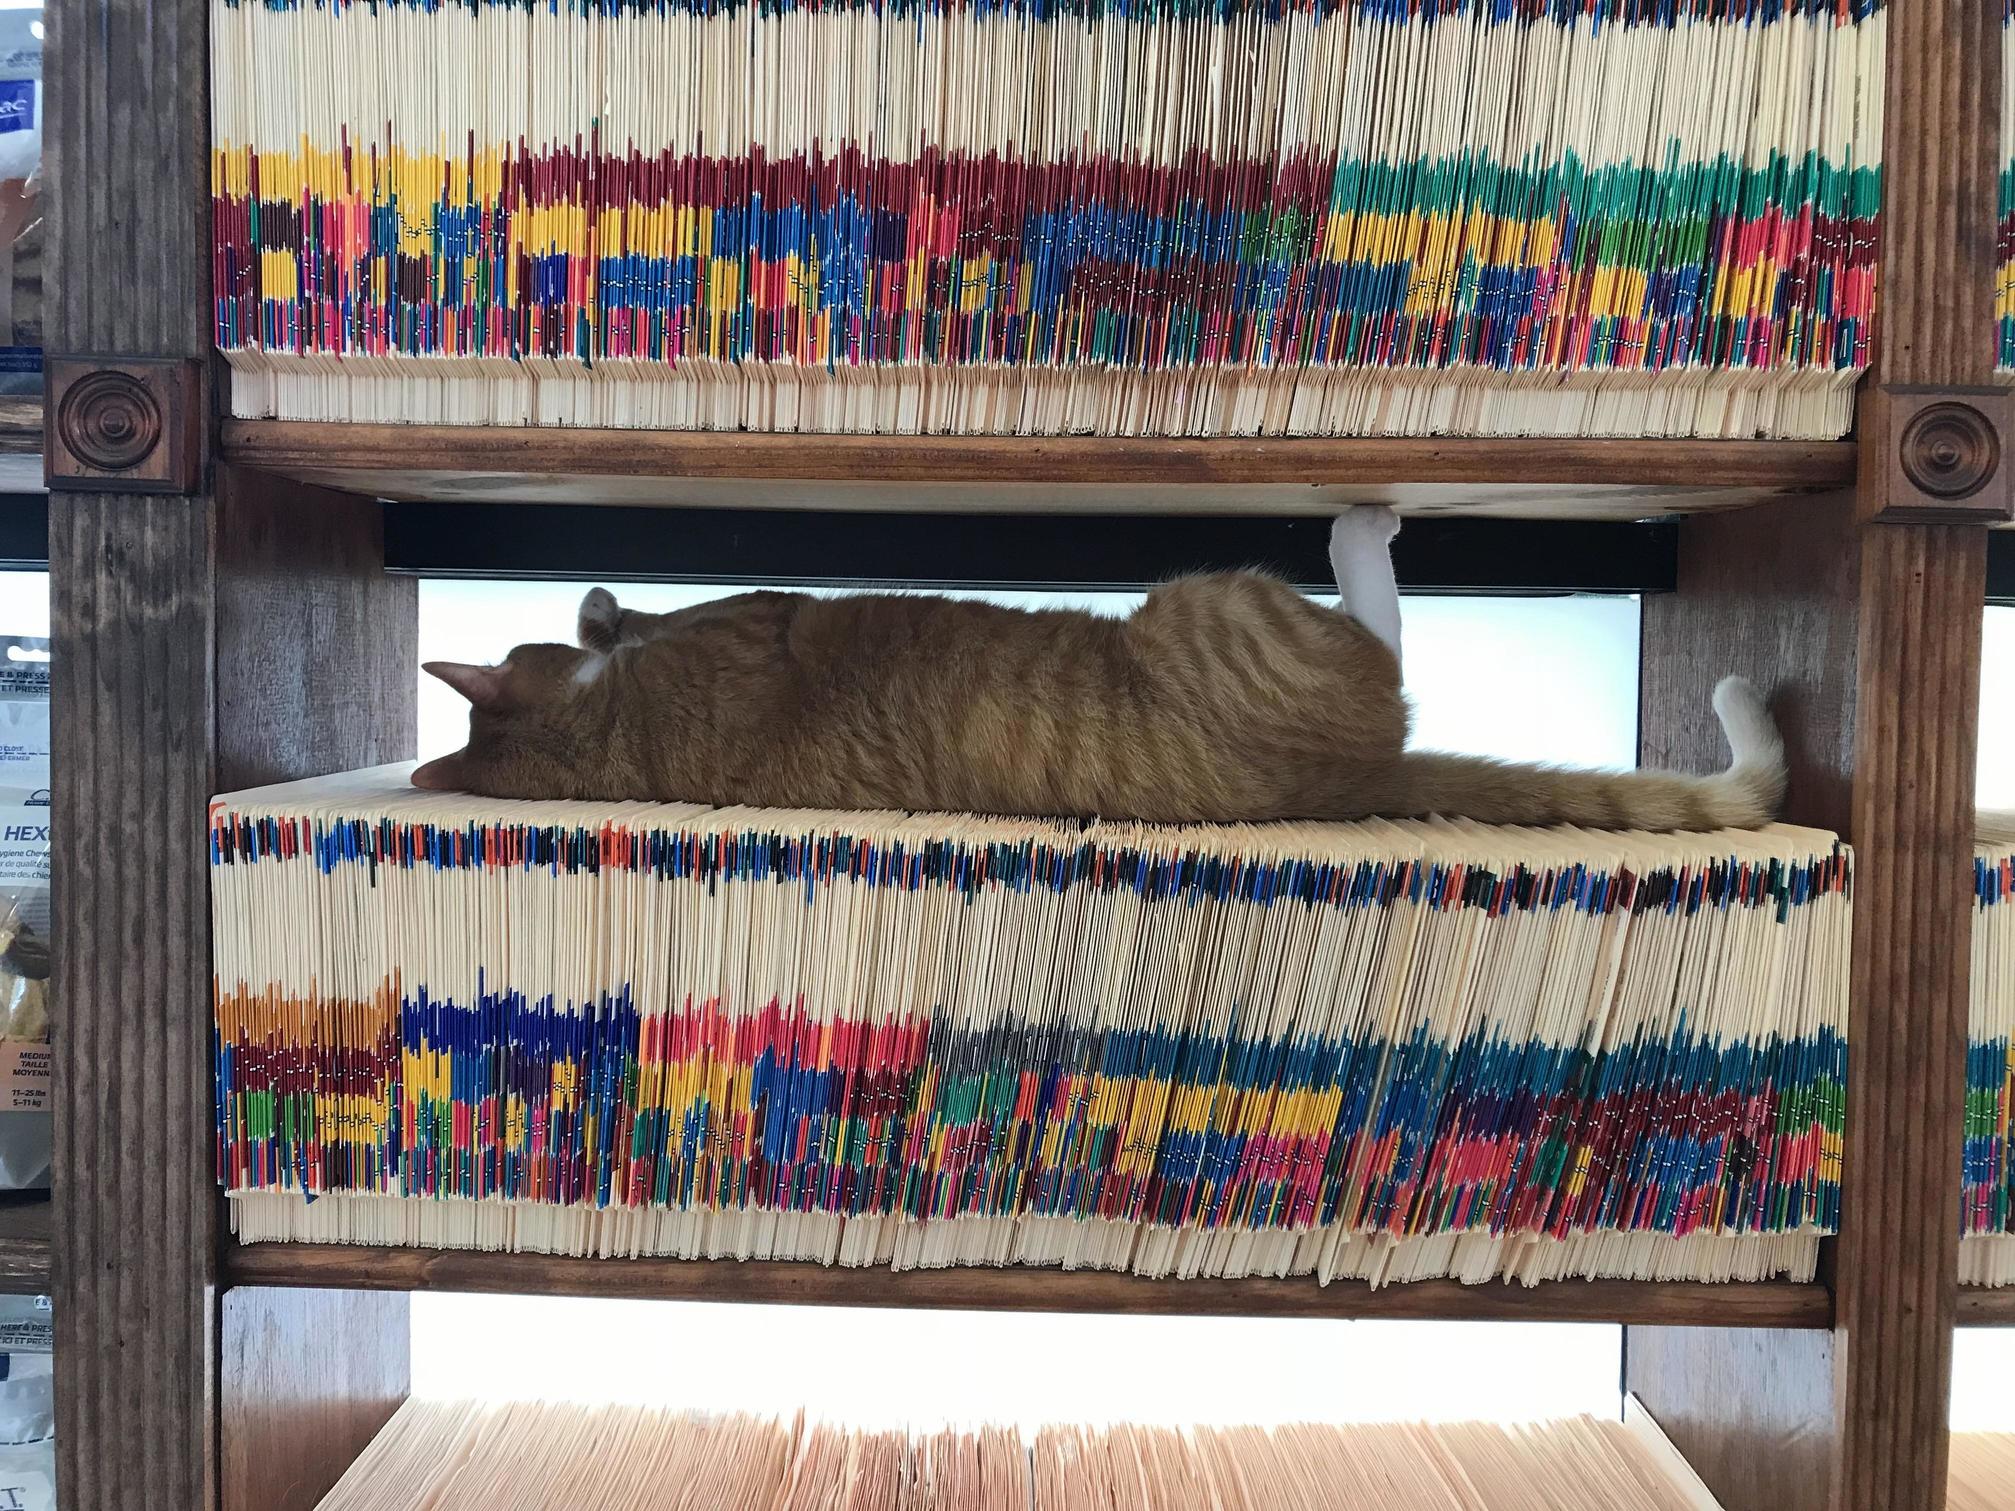 Roger the clinic cat napping on files.